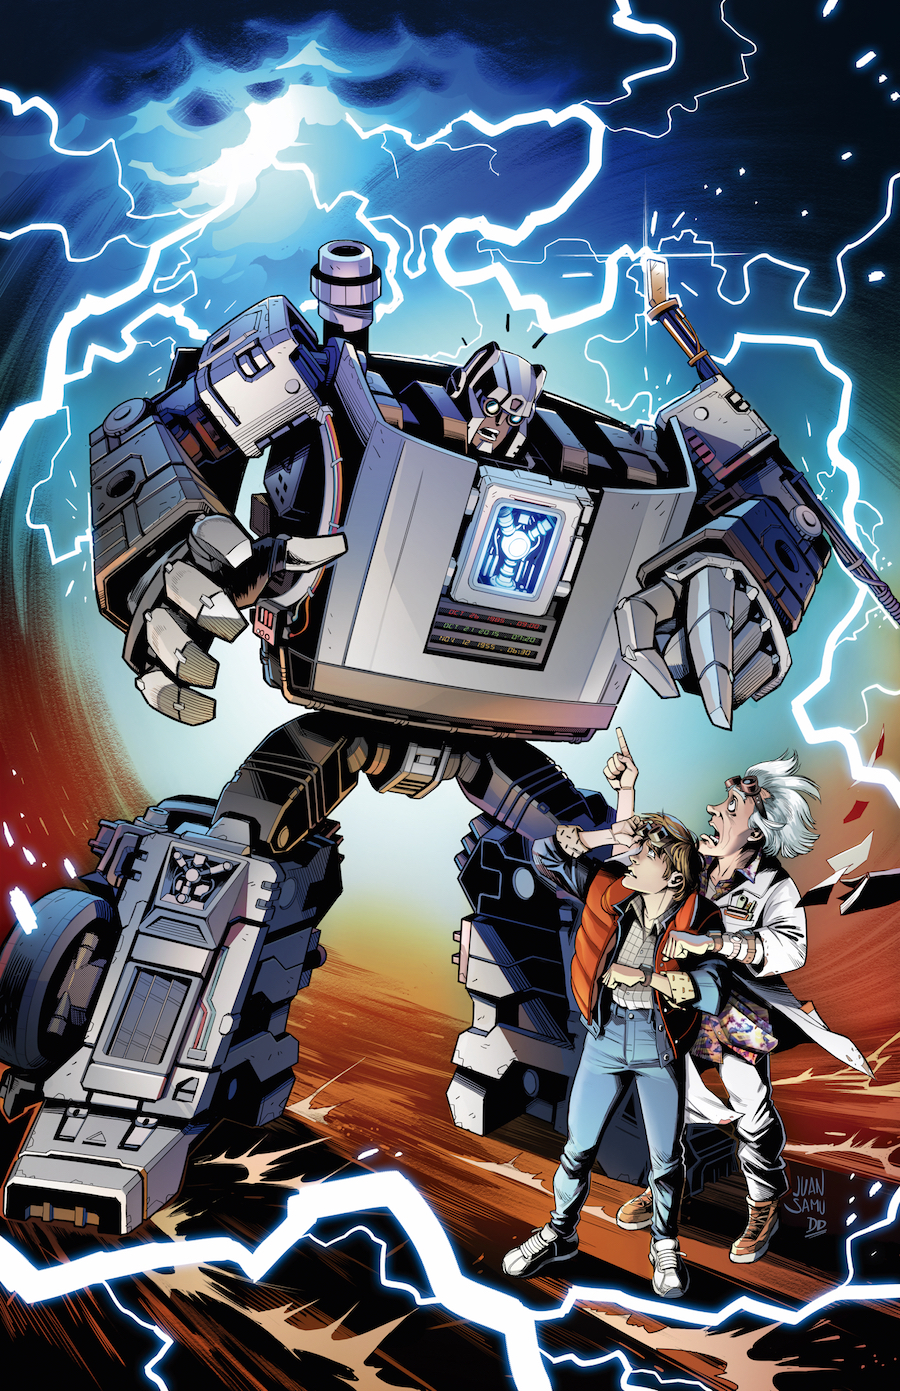 Transformers and Back to the Future crossover on the way